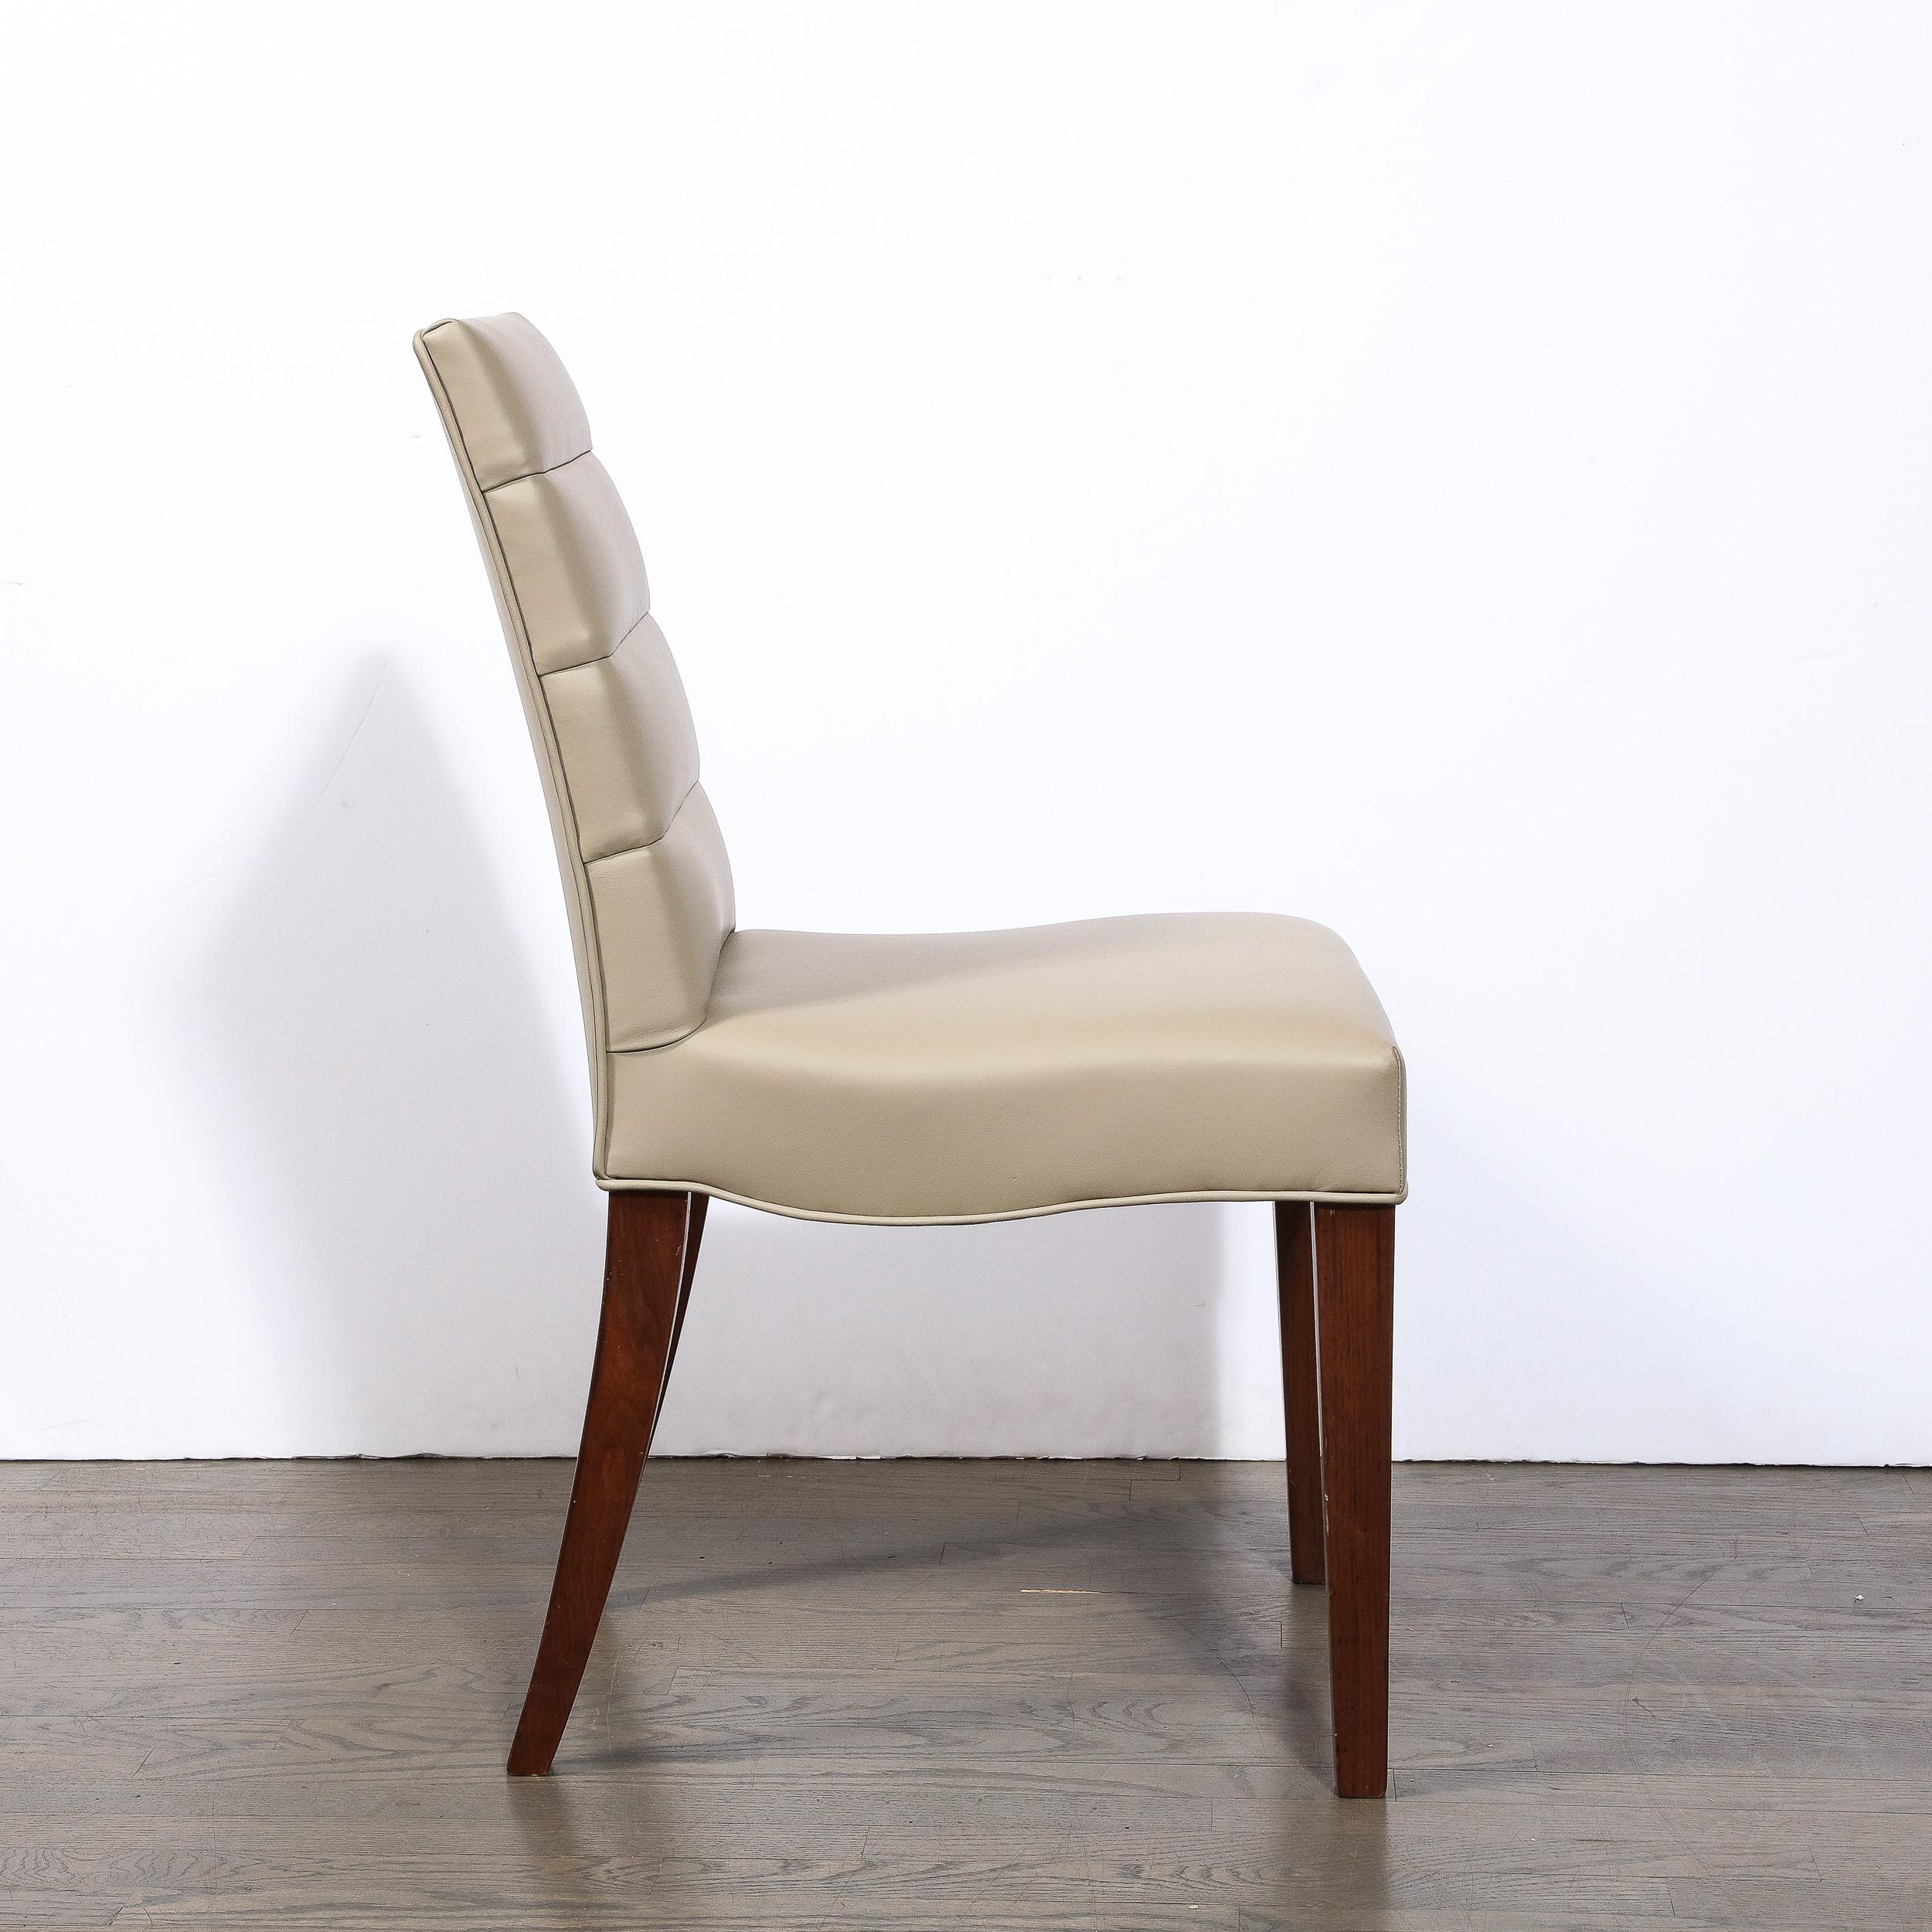 Art Deco Gilbert Rohde Chair in Holly Hunt Leather w/ Tufted Back & Walnut Legs For Sale 5